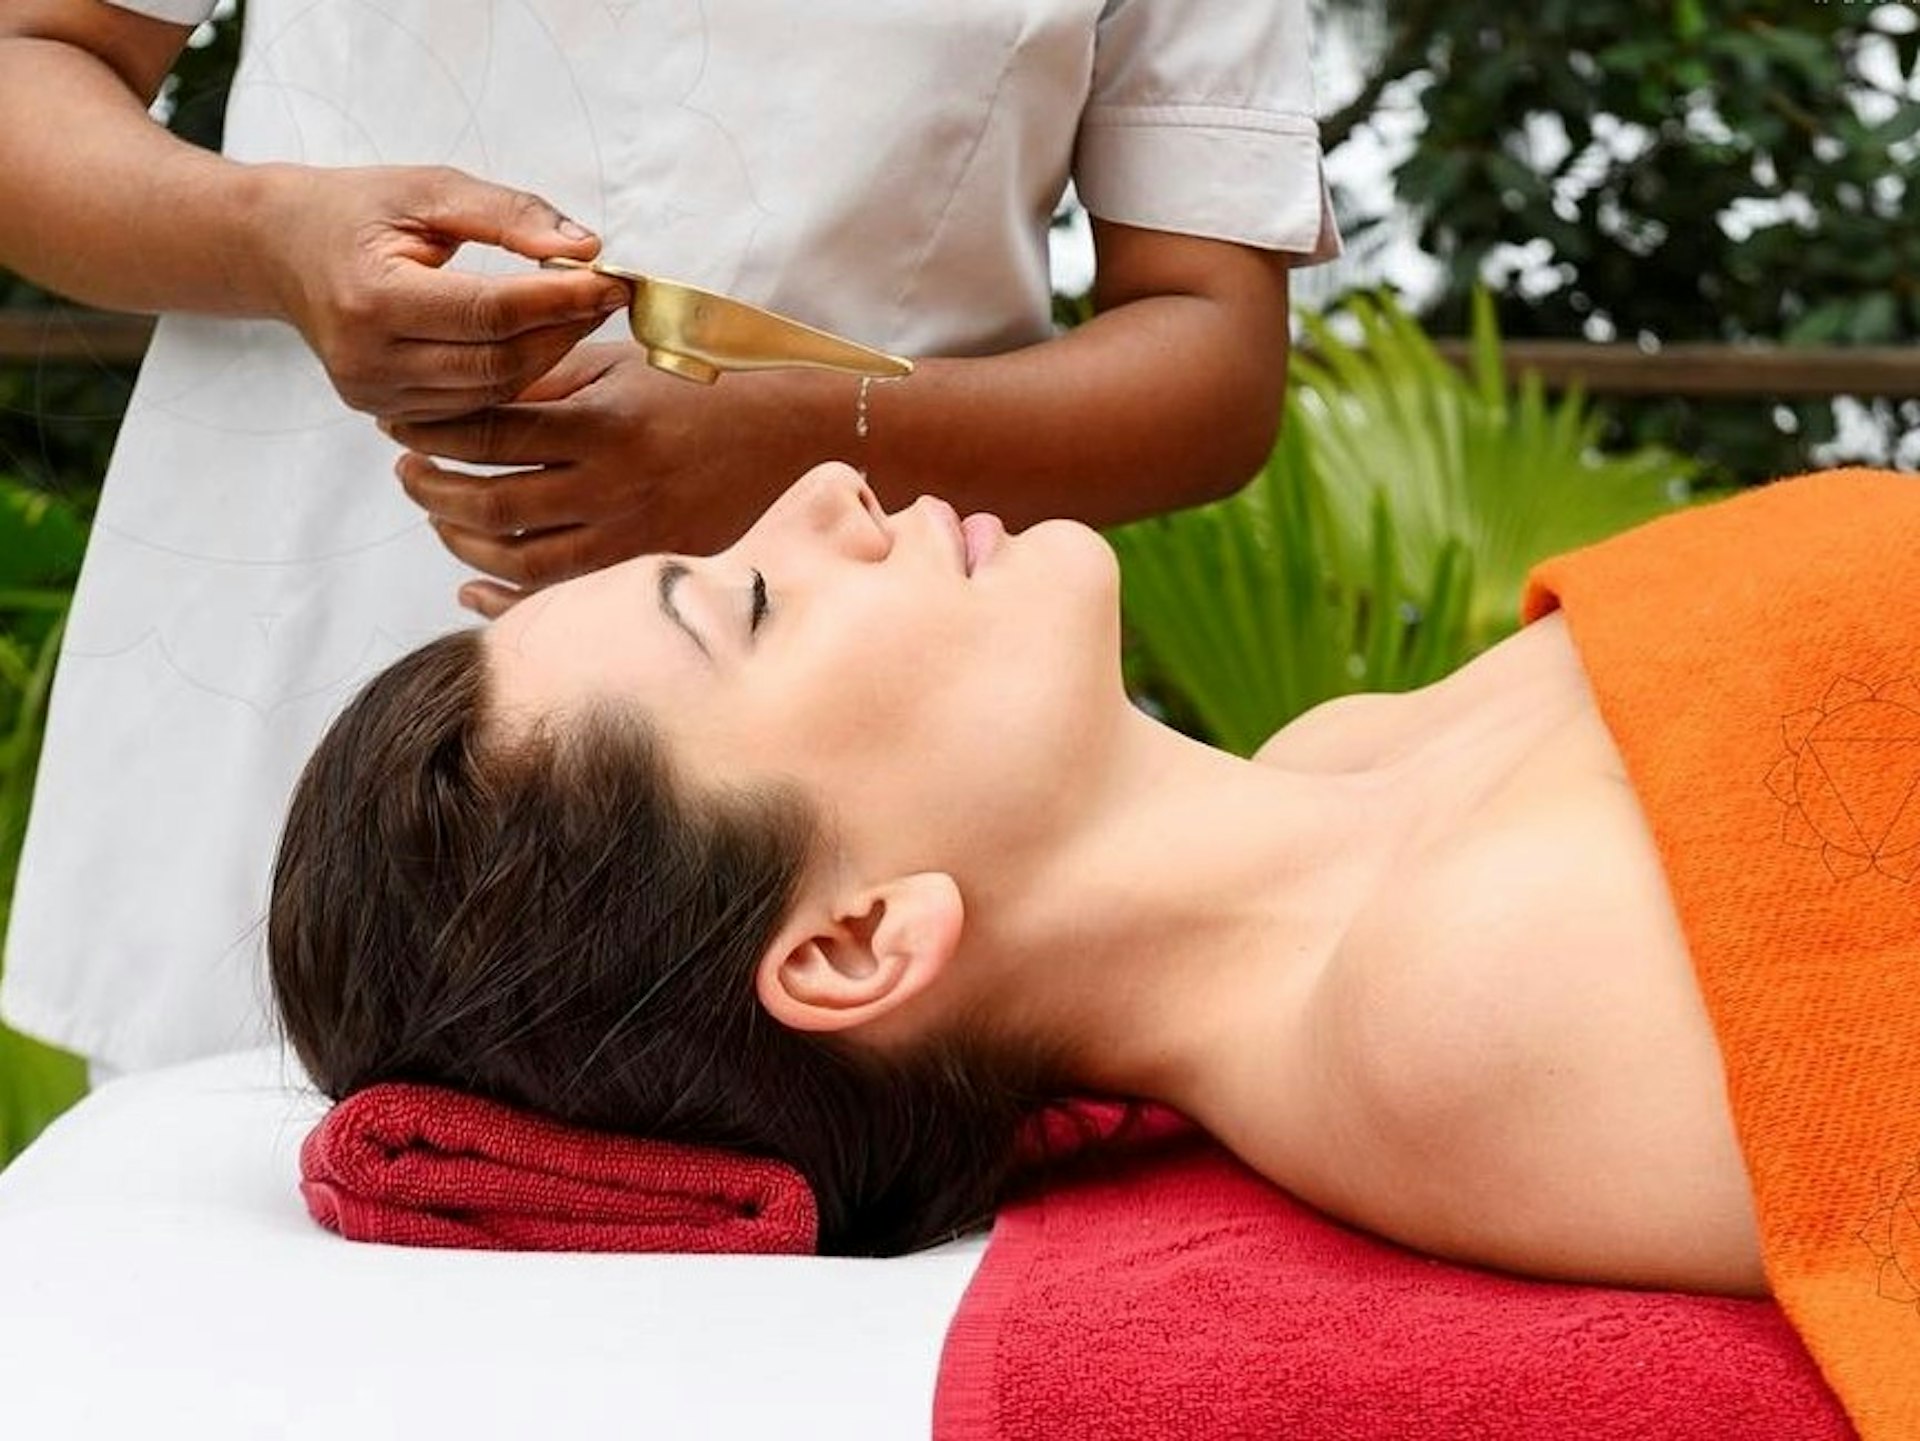 A woman undergoes a chakra cleansing at the Andana in the Himalayas spa. The customer lies on her back while a staff member pours oil into her nose.